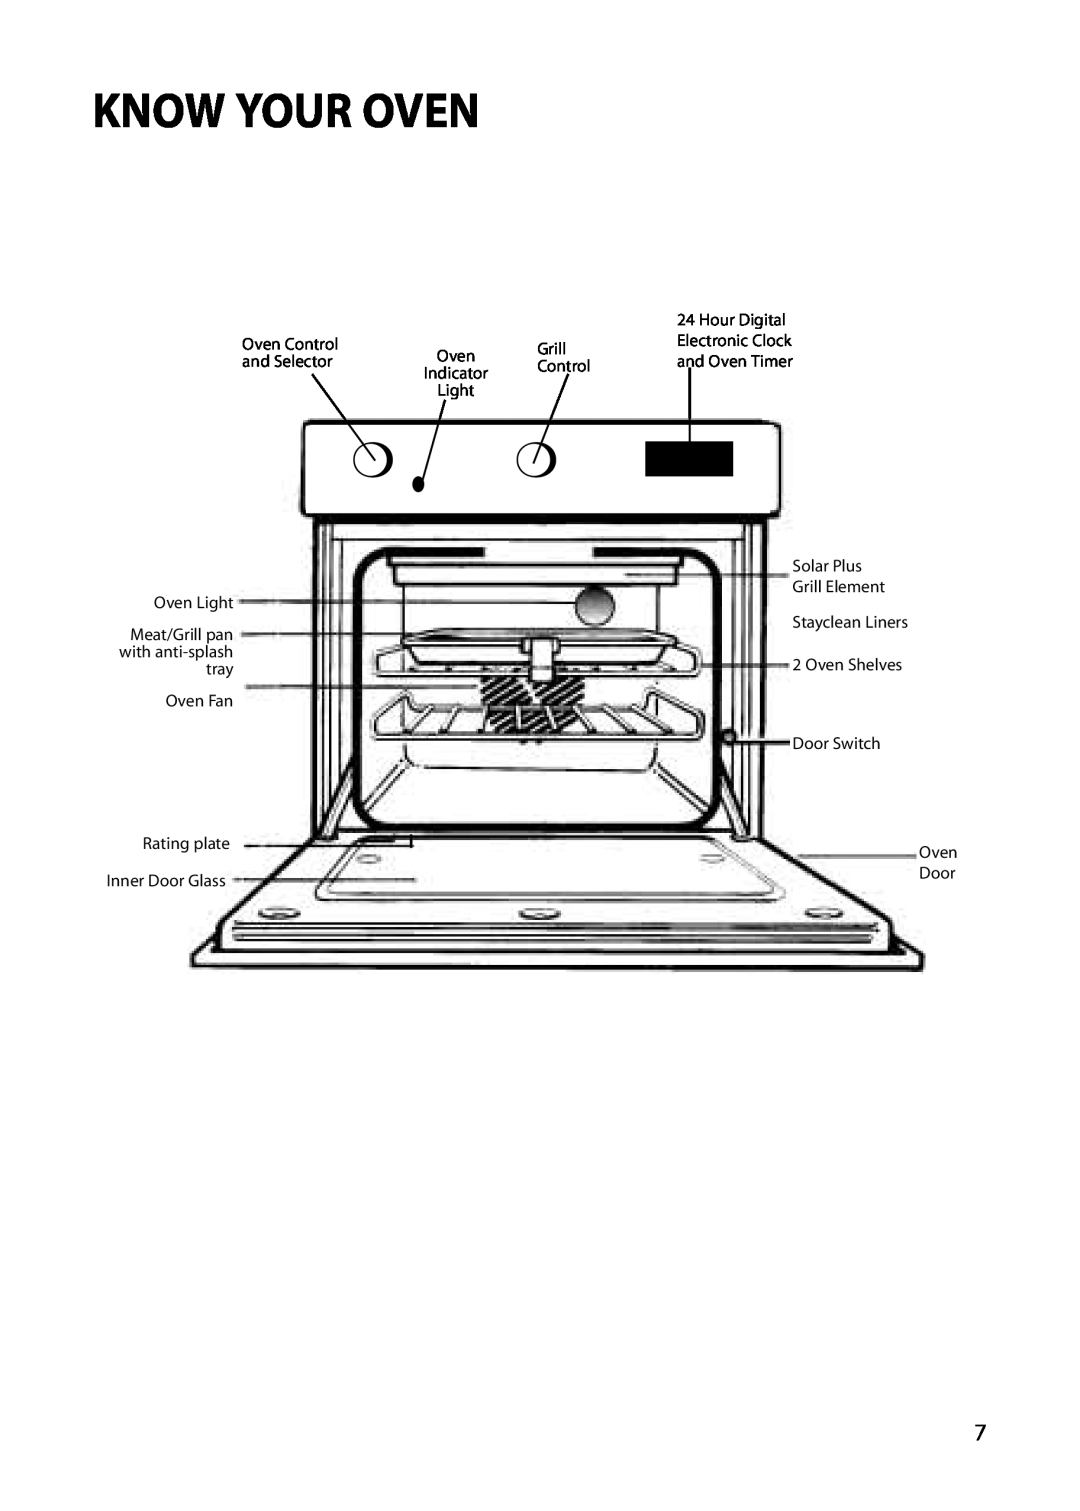 Creda REFLECTION manual Know Your Oven 